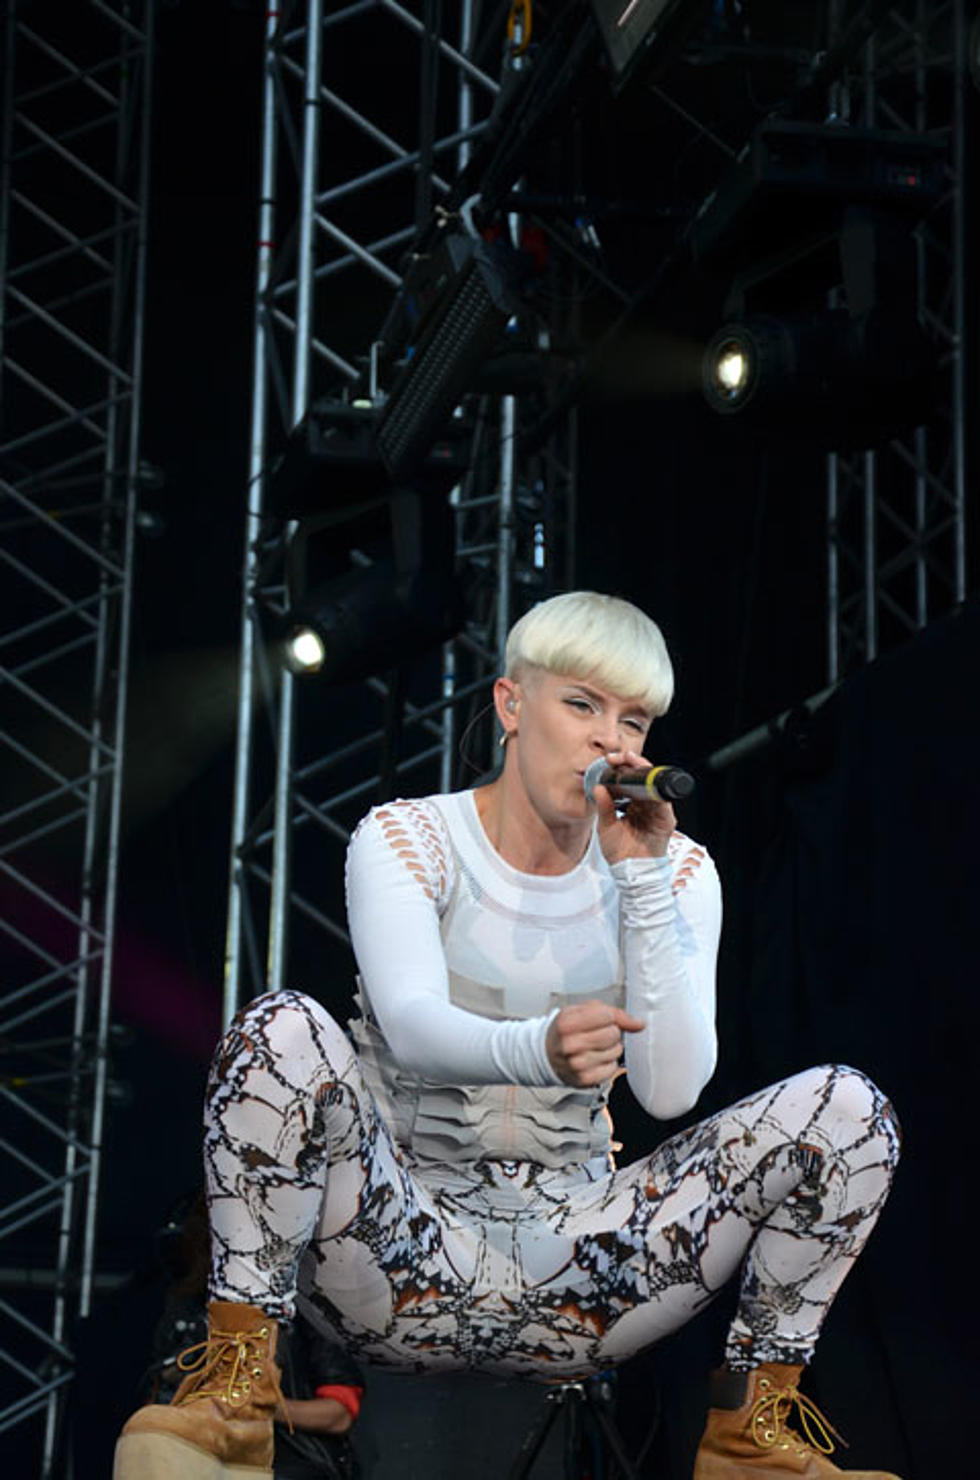 Robyn played SNL &#038; Way Out West (videos &#038; live pics)